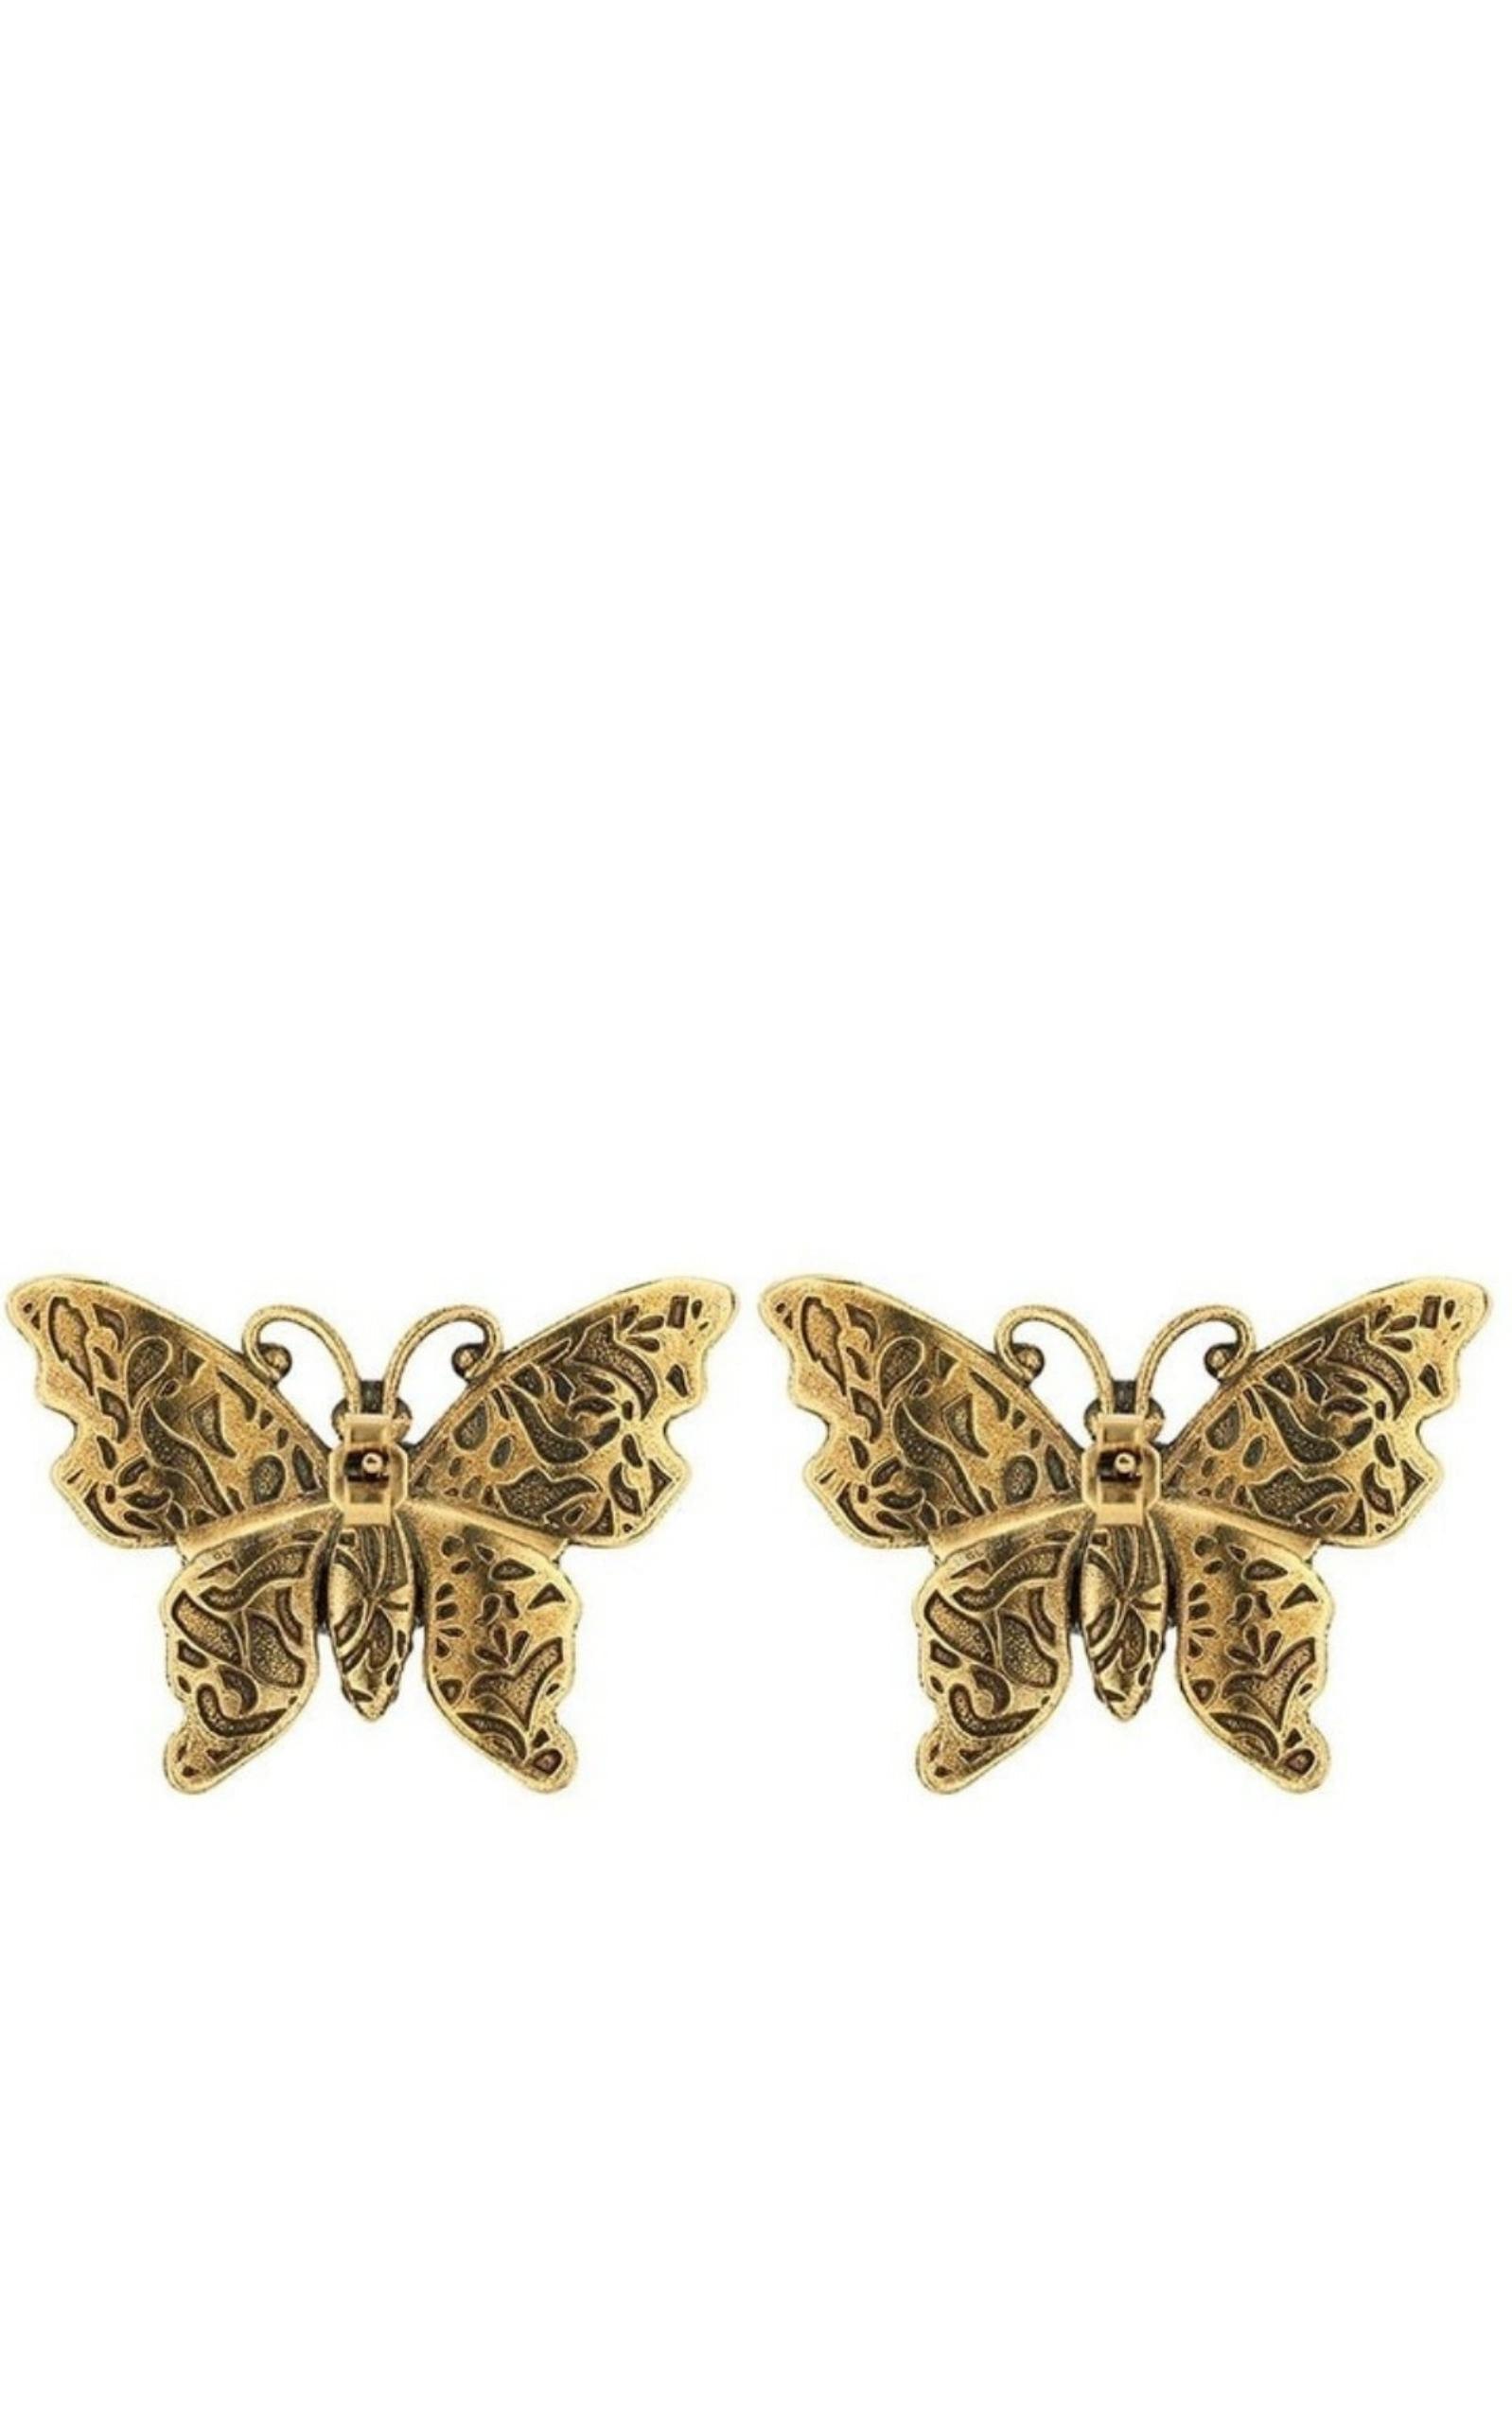  GucciCrystal Studded Butterfly Earrings - Runway Catalog